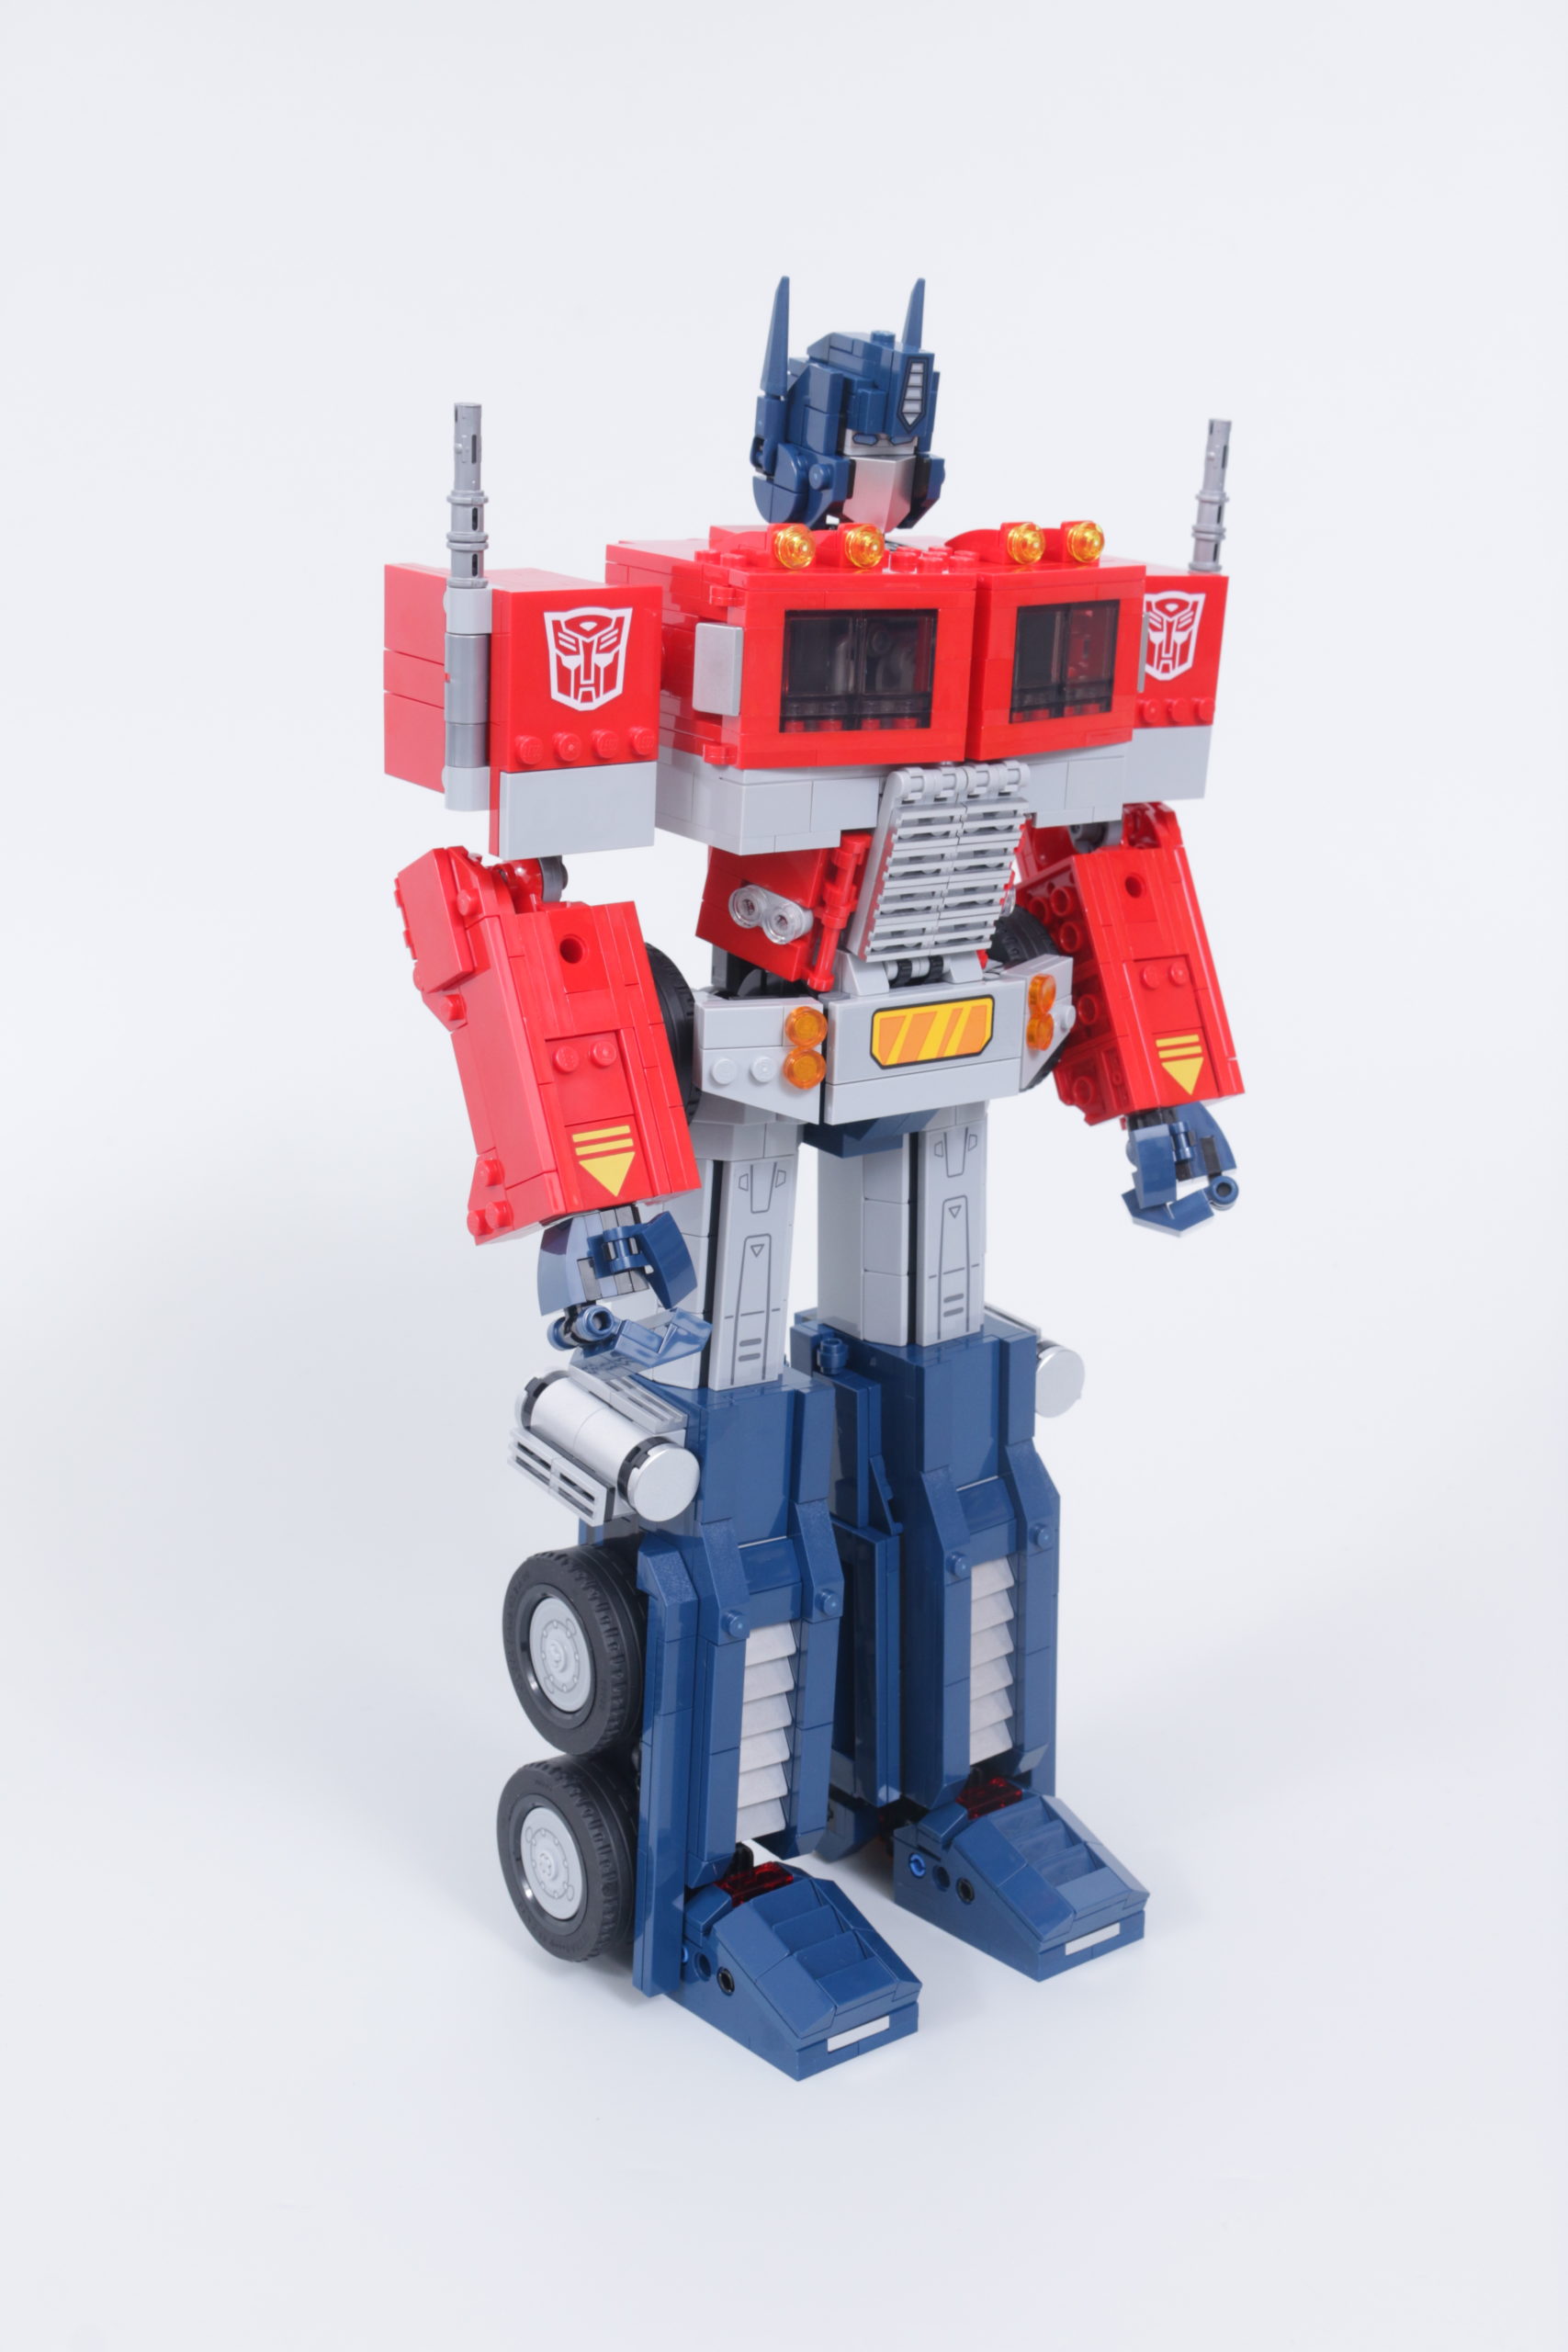 LEGO Transformers 10302 Optimus Prime review 31 scaled